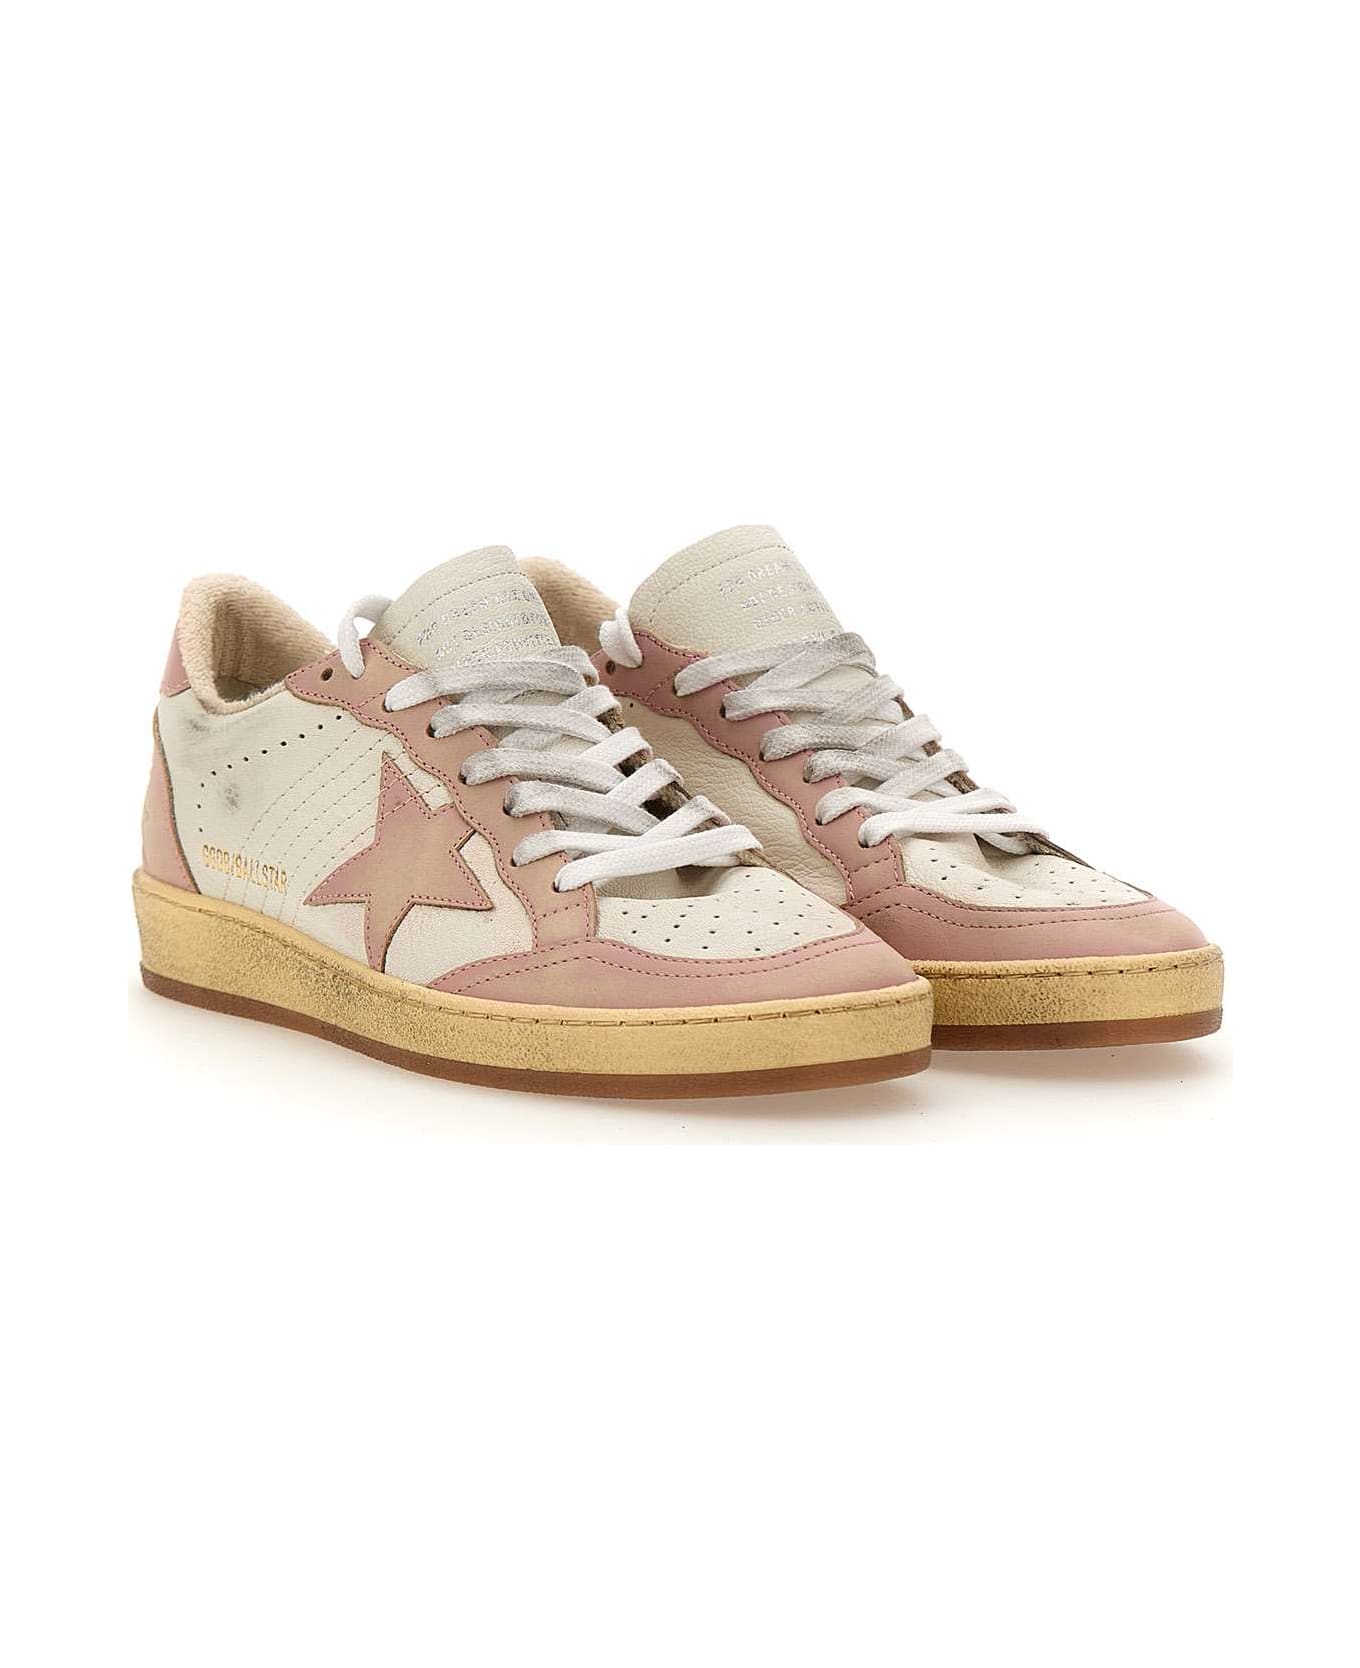 Golden Goose Ball Star Leather Sneakers - White/Pink スニーカー